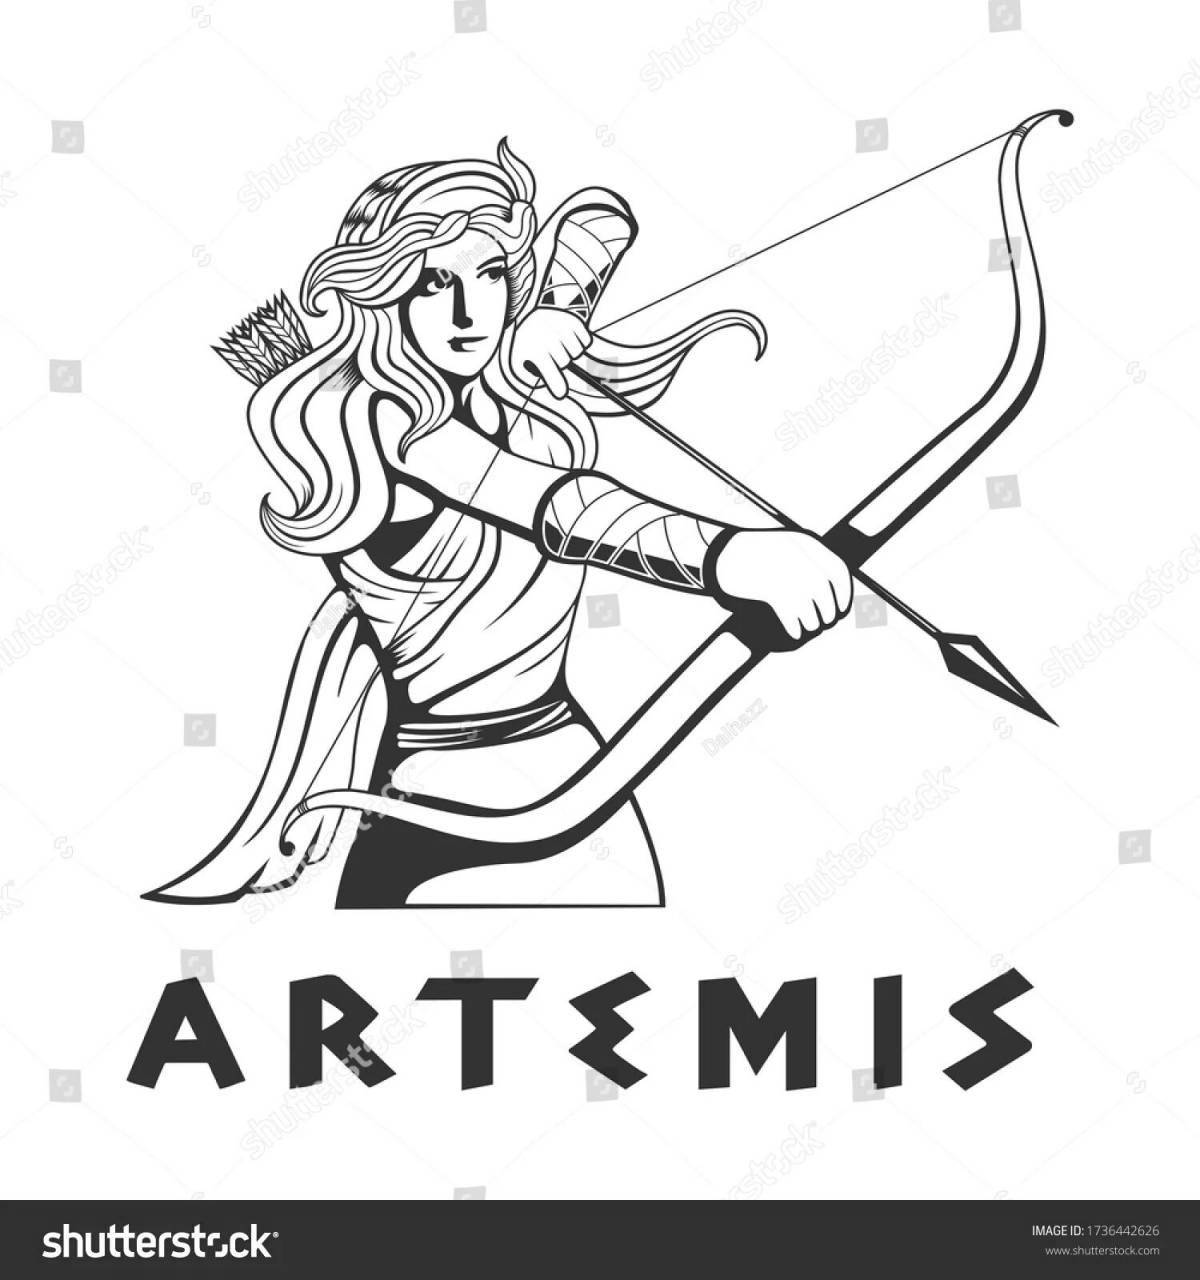 Amazing coloring of the Goddess Artemis